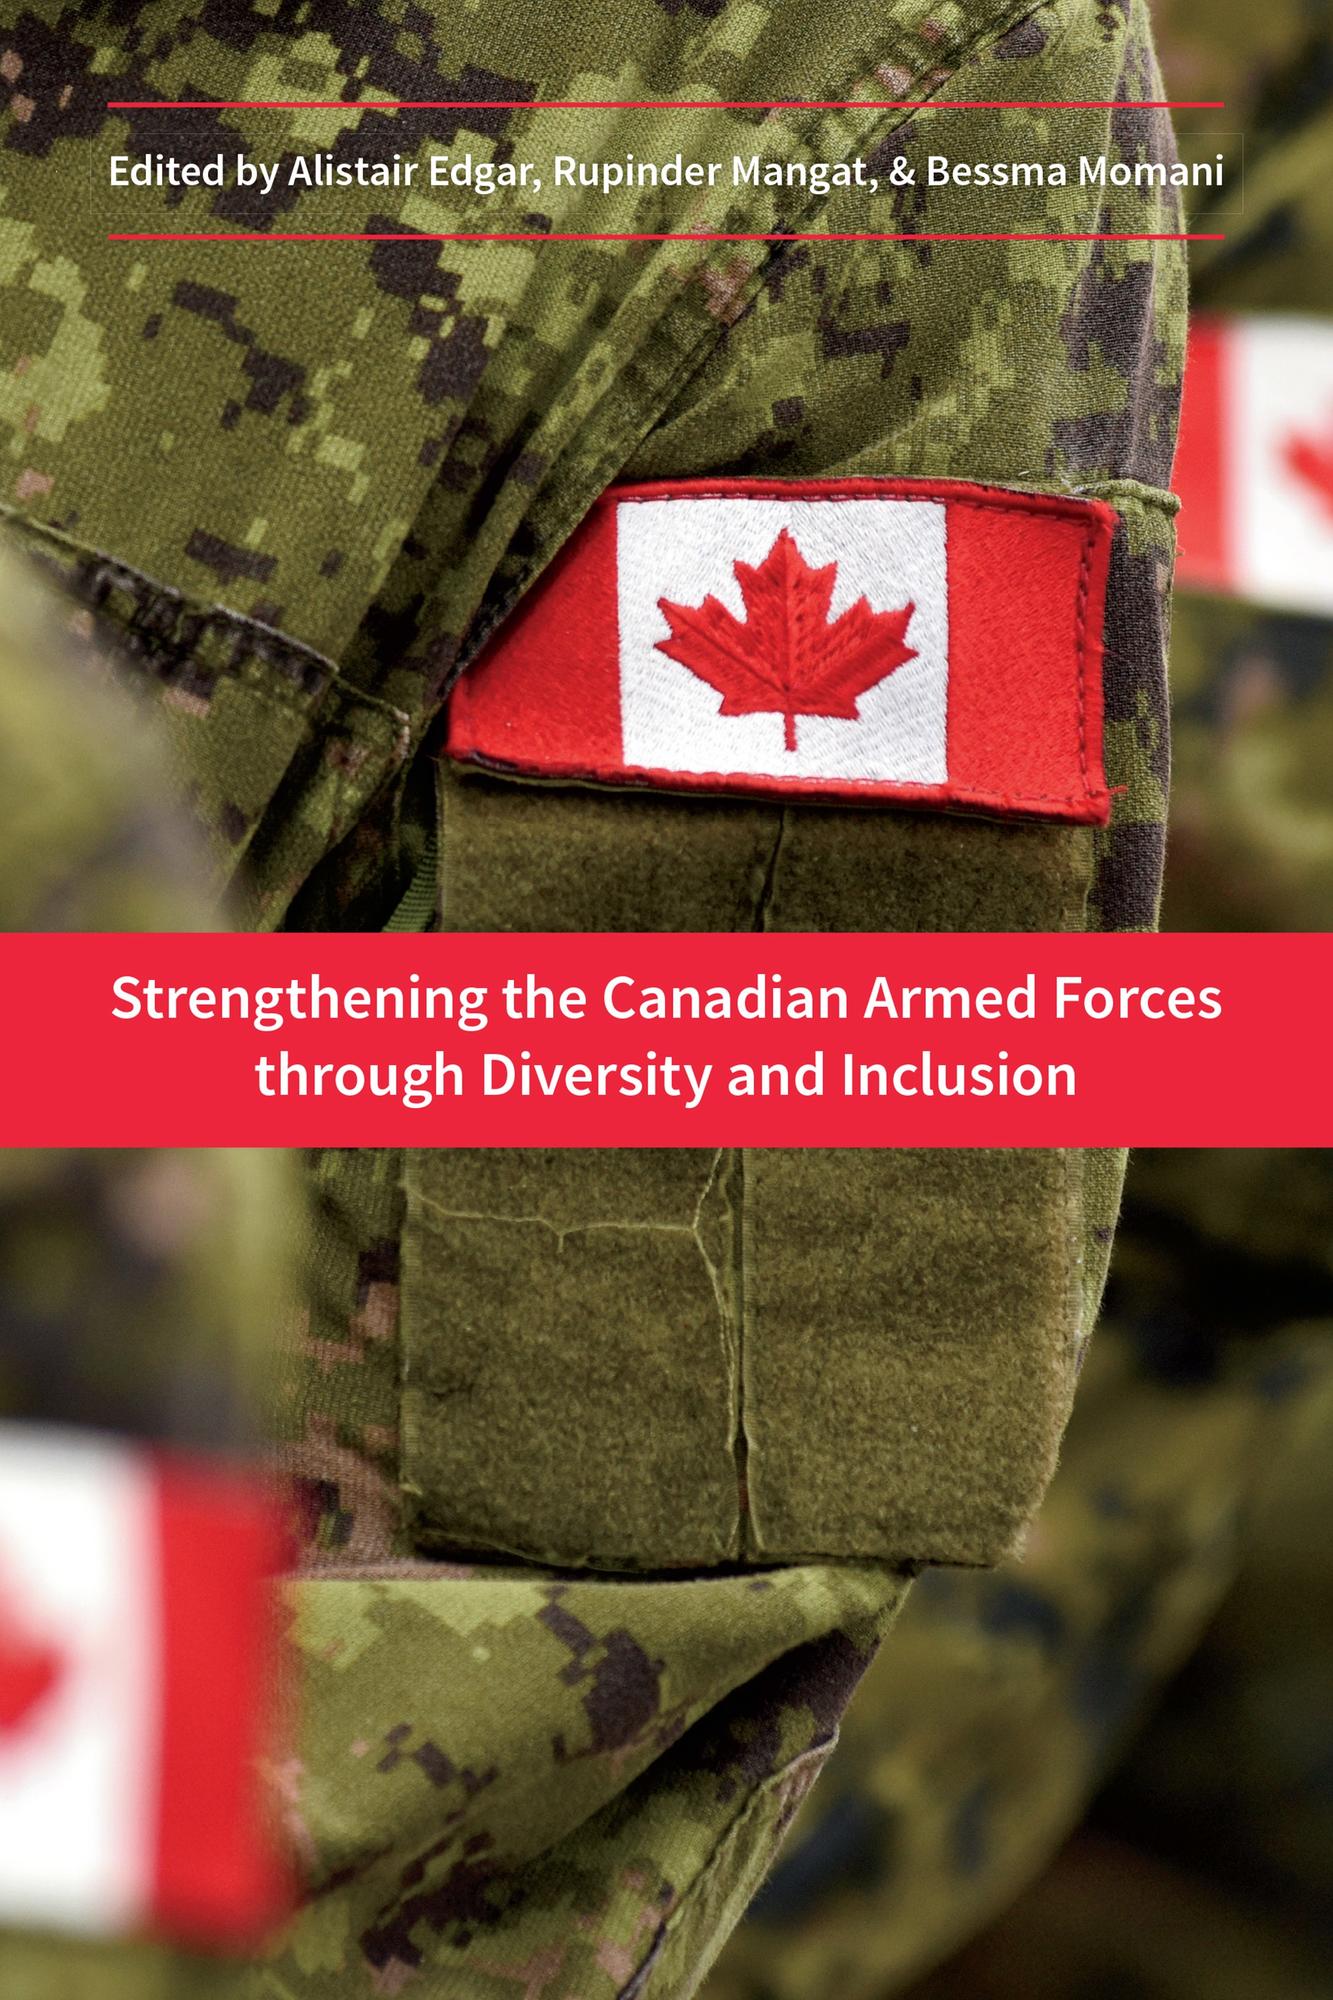 Book Cover - Strengthening the Canadian Armed Forces through Diversity and Inclusion